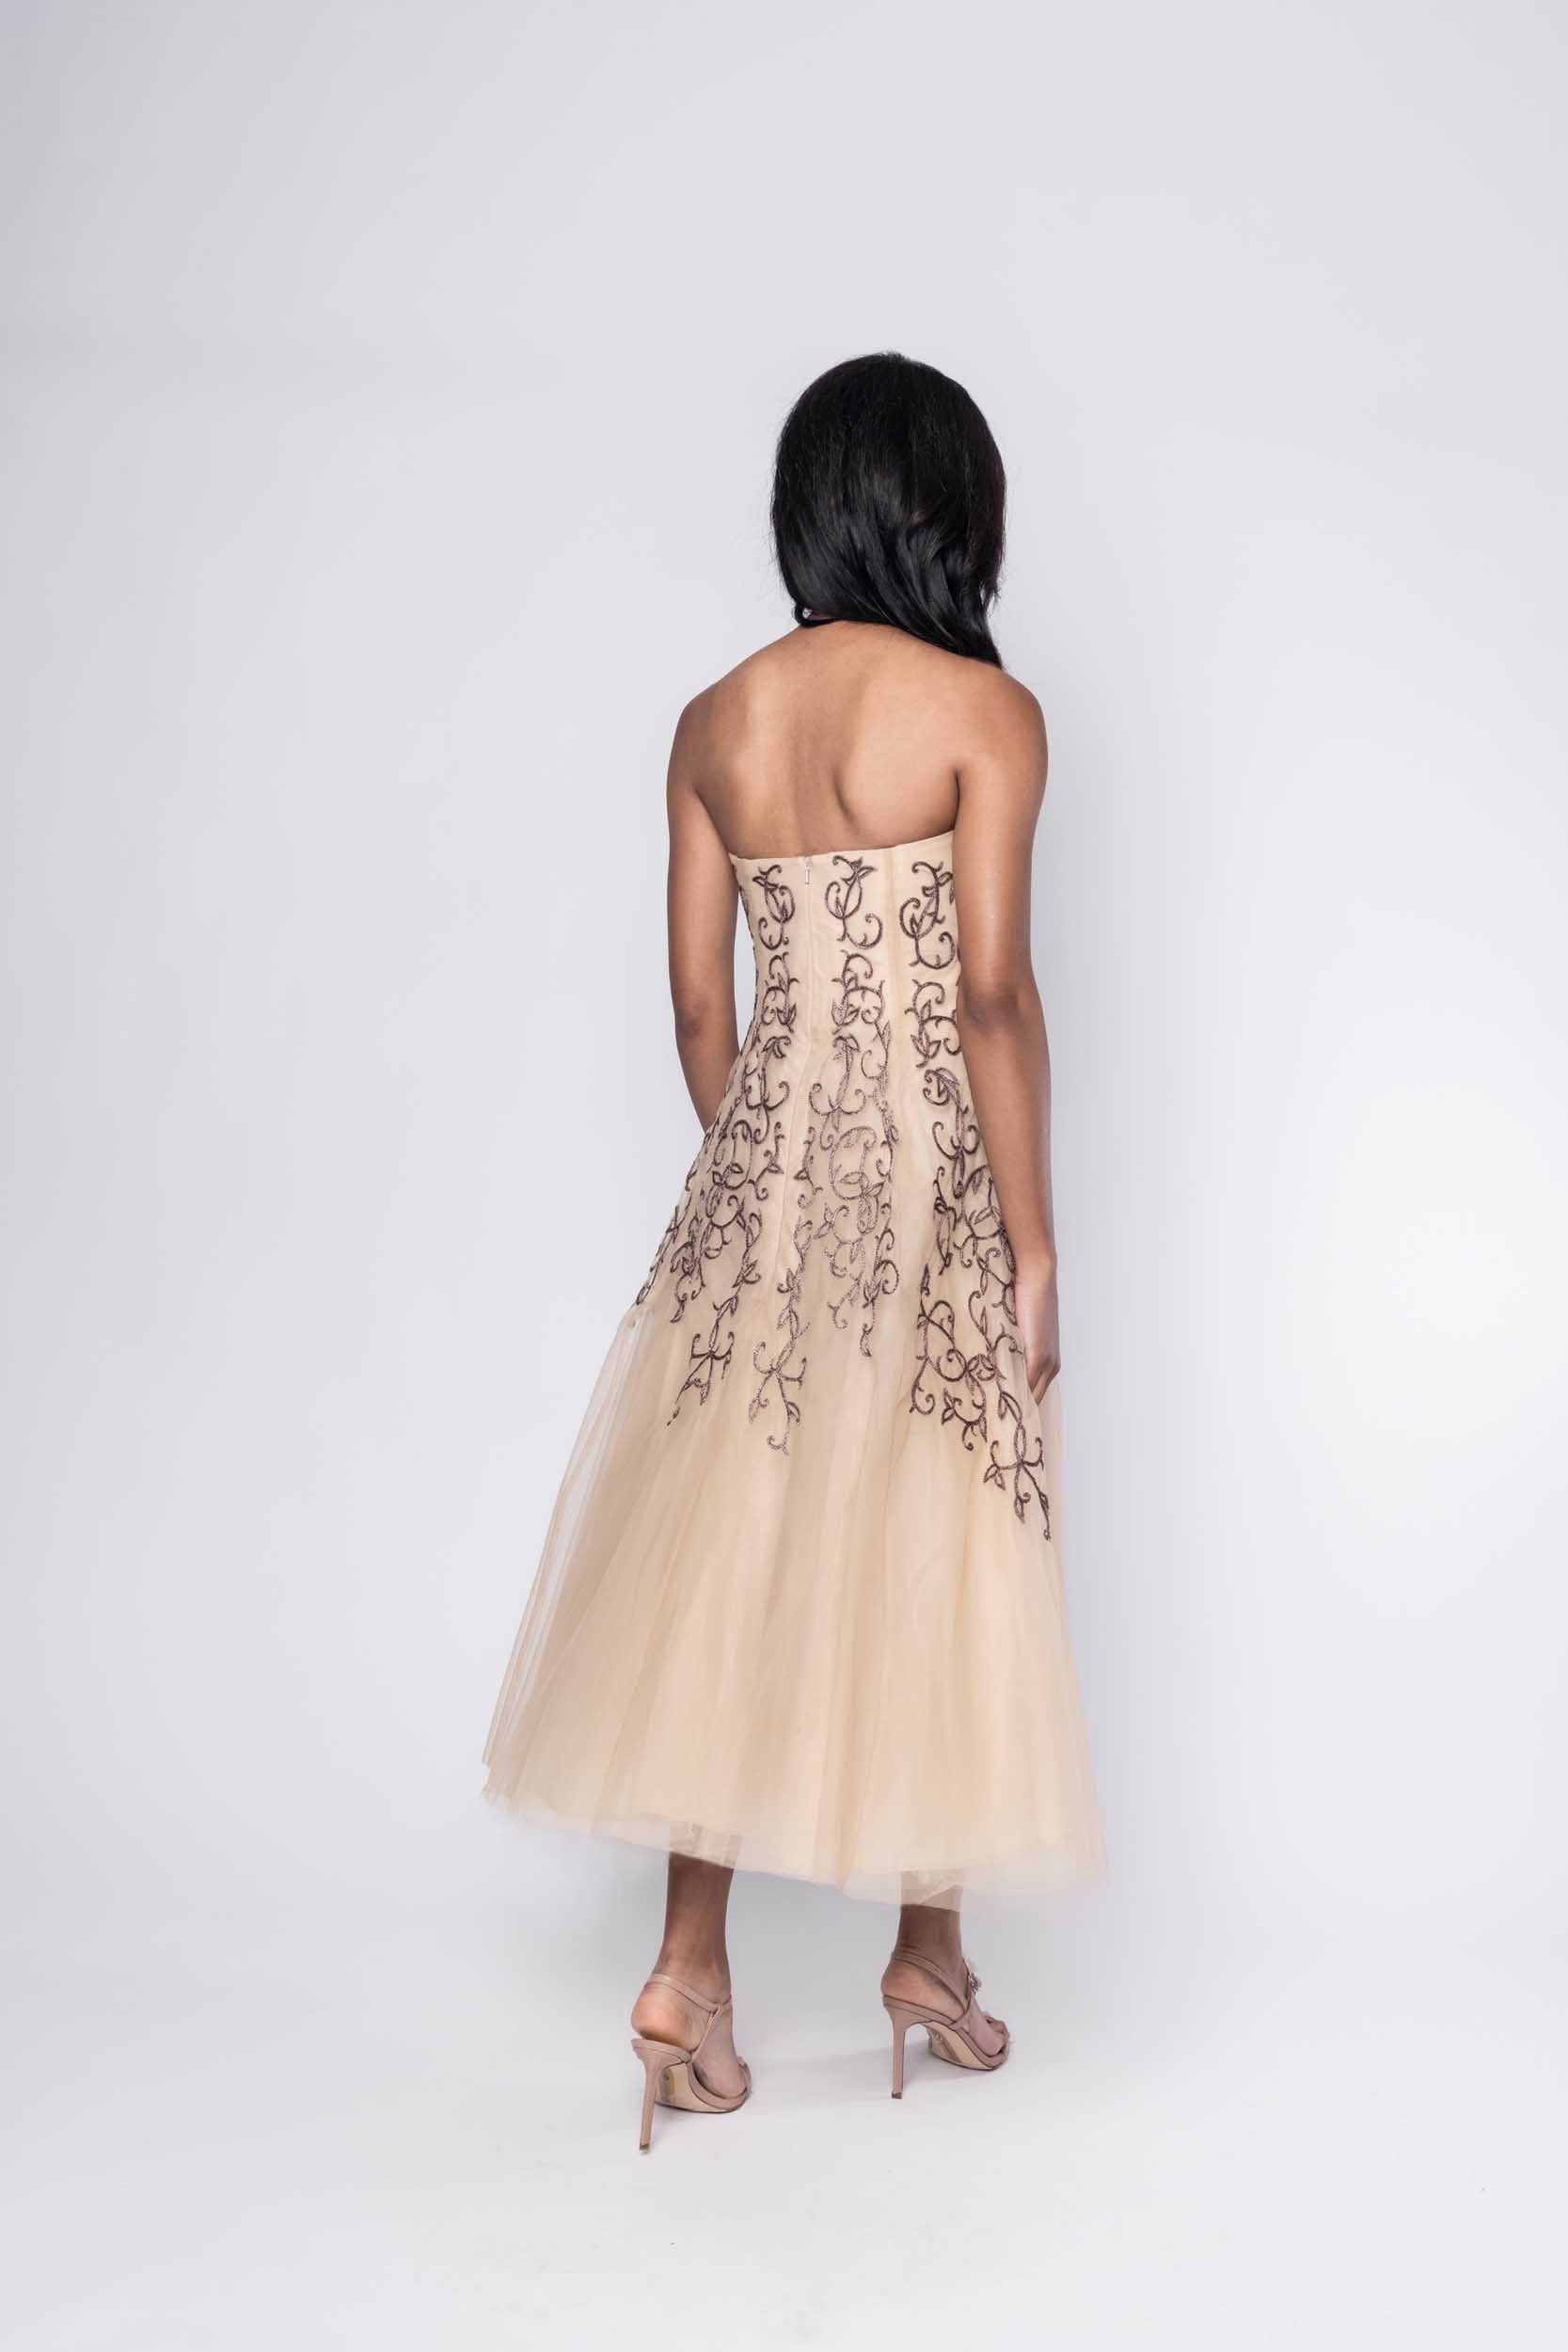 Beautiful model in nude Sujata Gazder dress with ornate stitching - back view